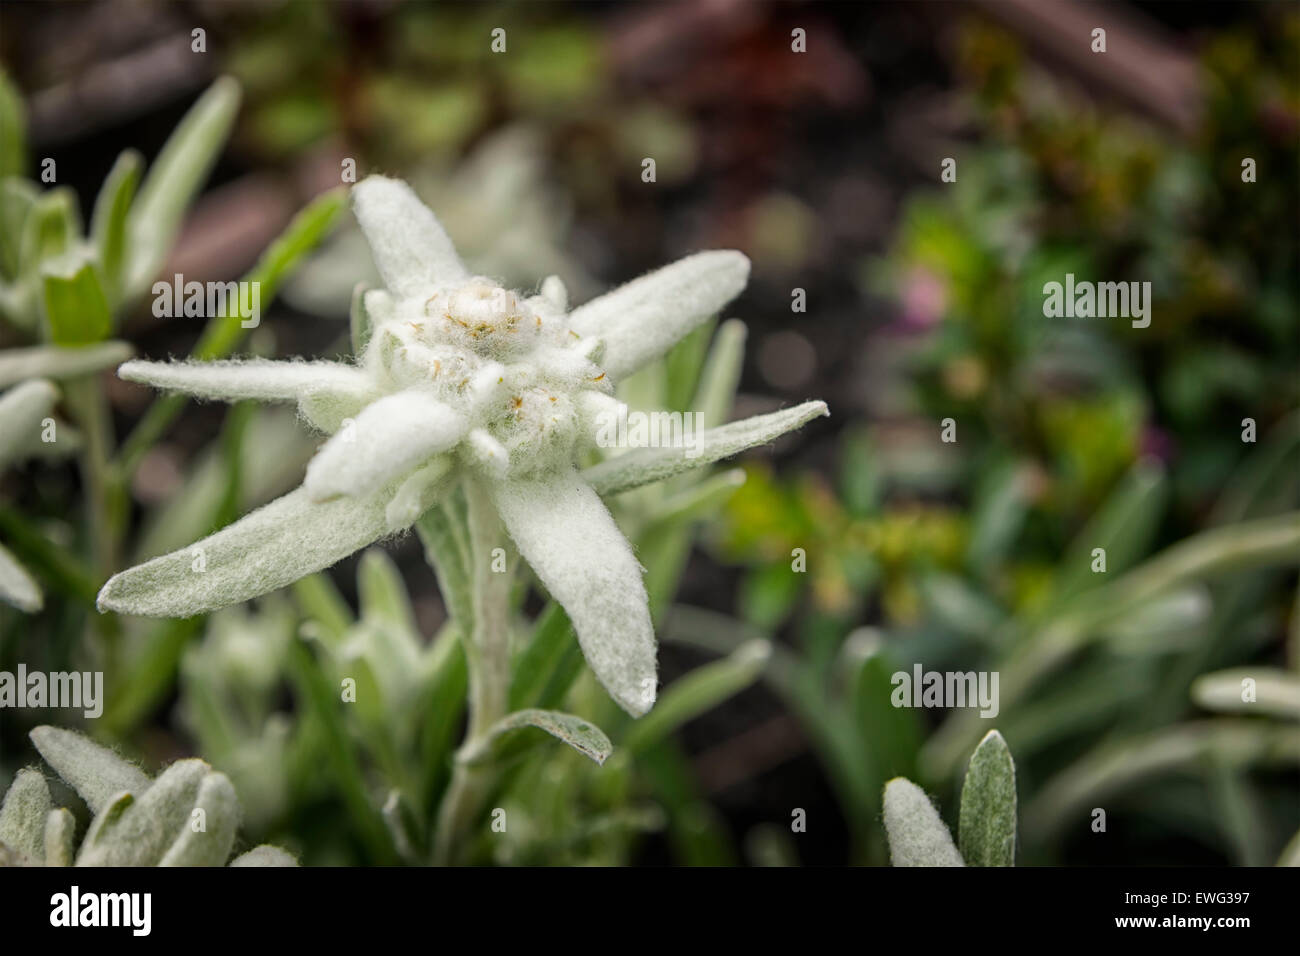 Picture of a edelweiss flower in the mountains Stock Photo